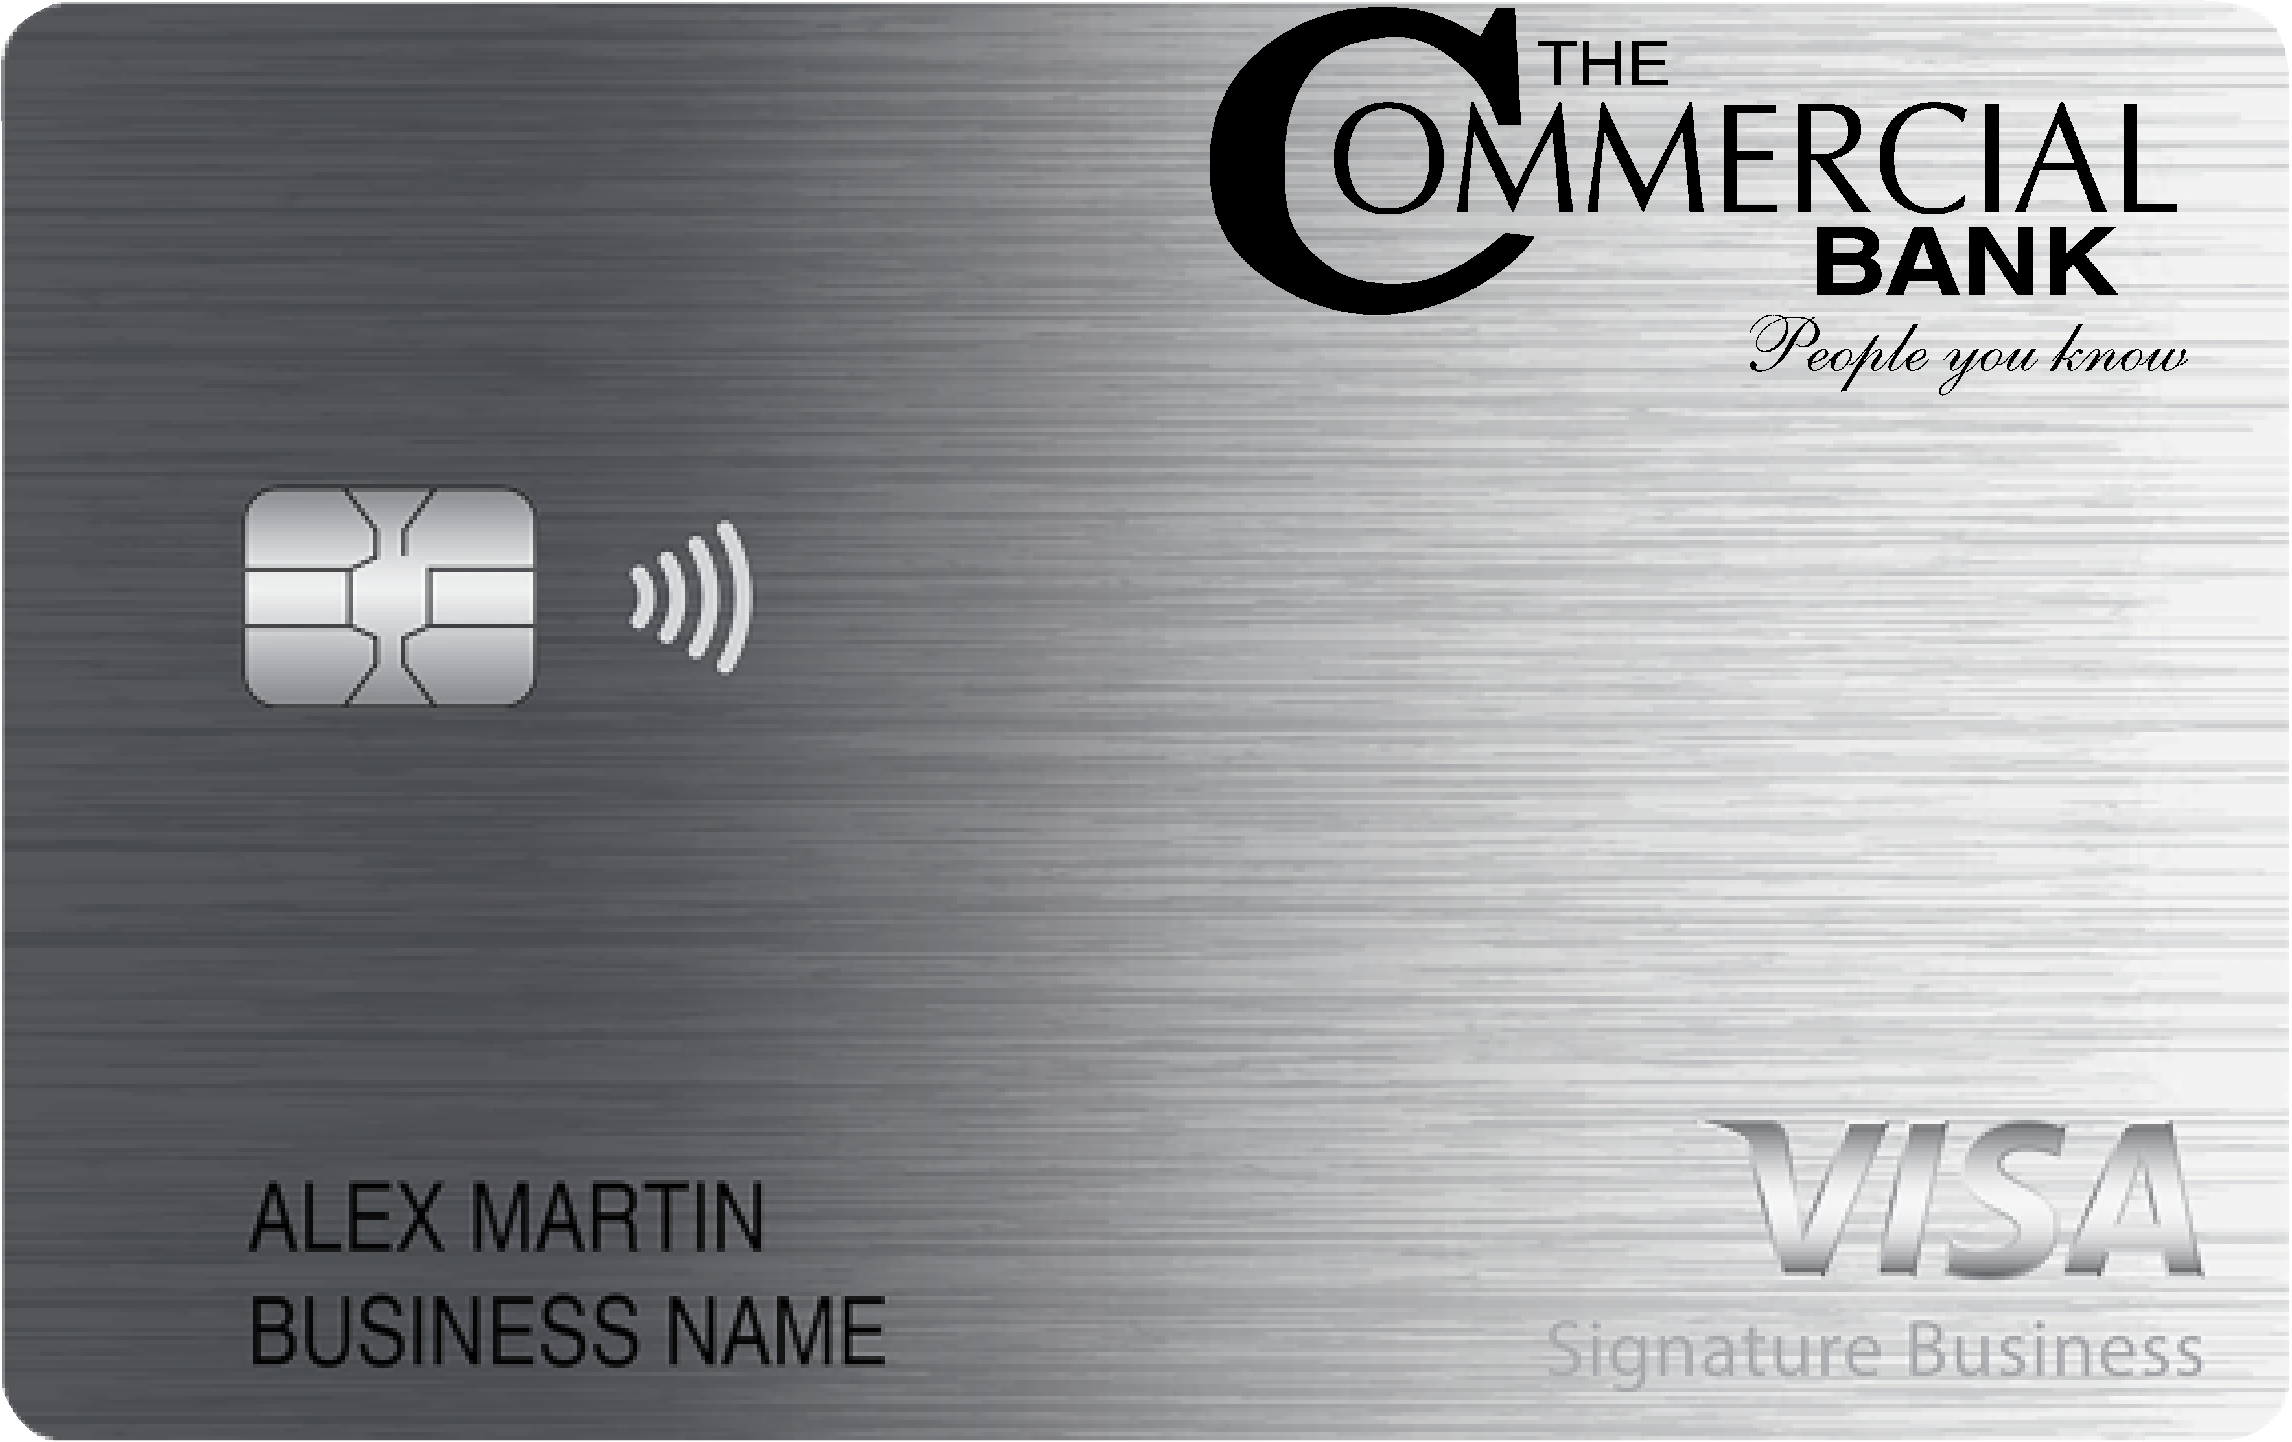 The Commercial Bank Smart Business Rewards Card